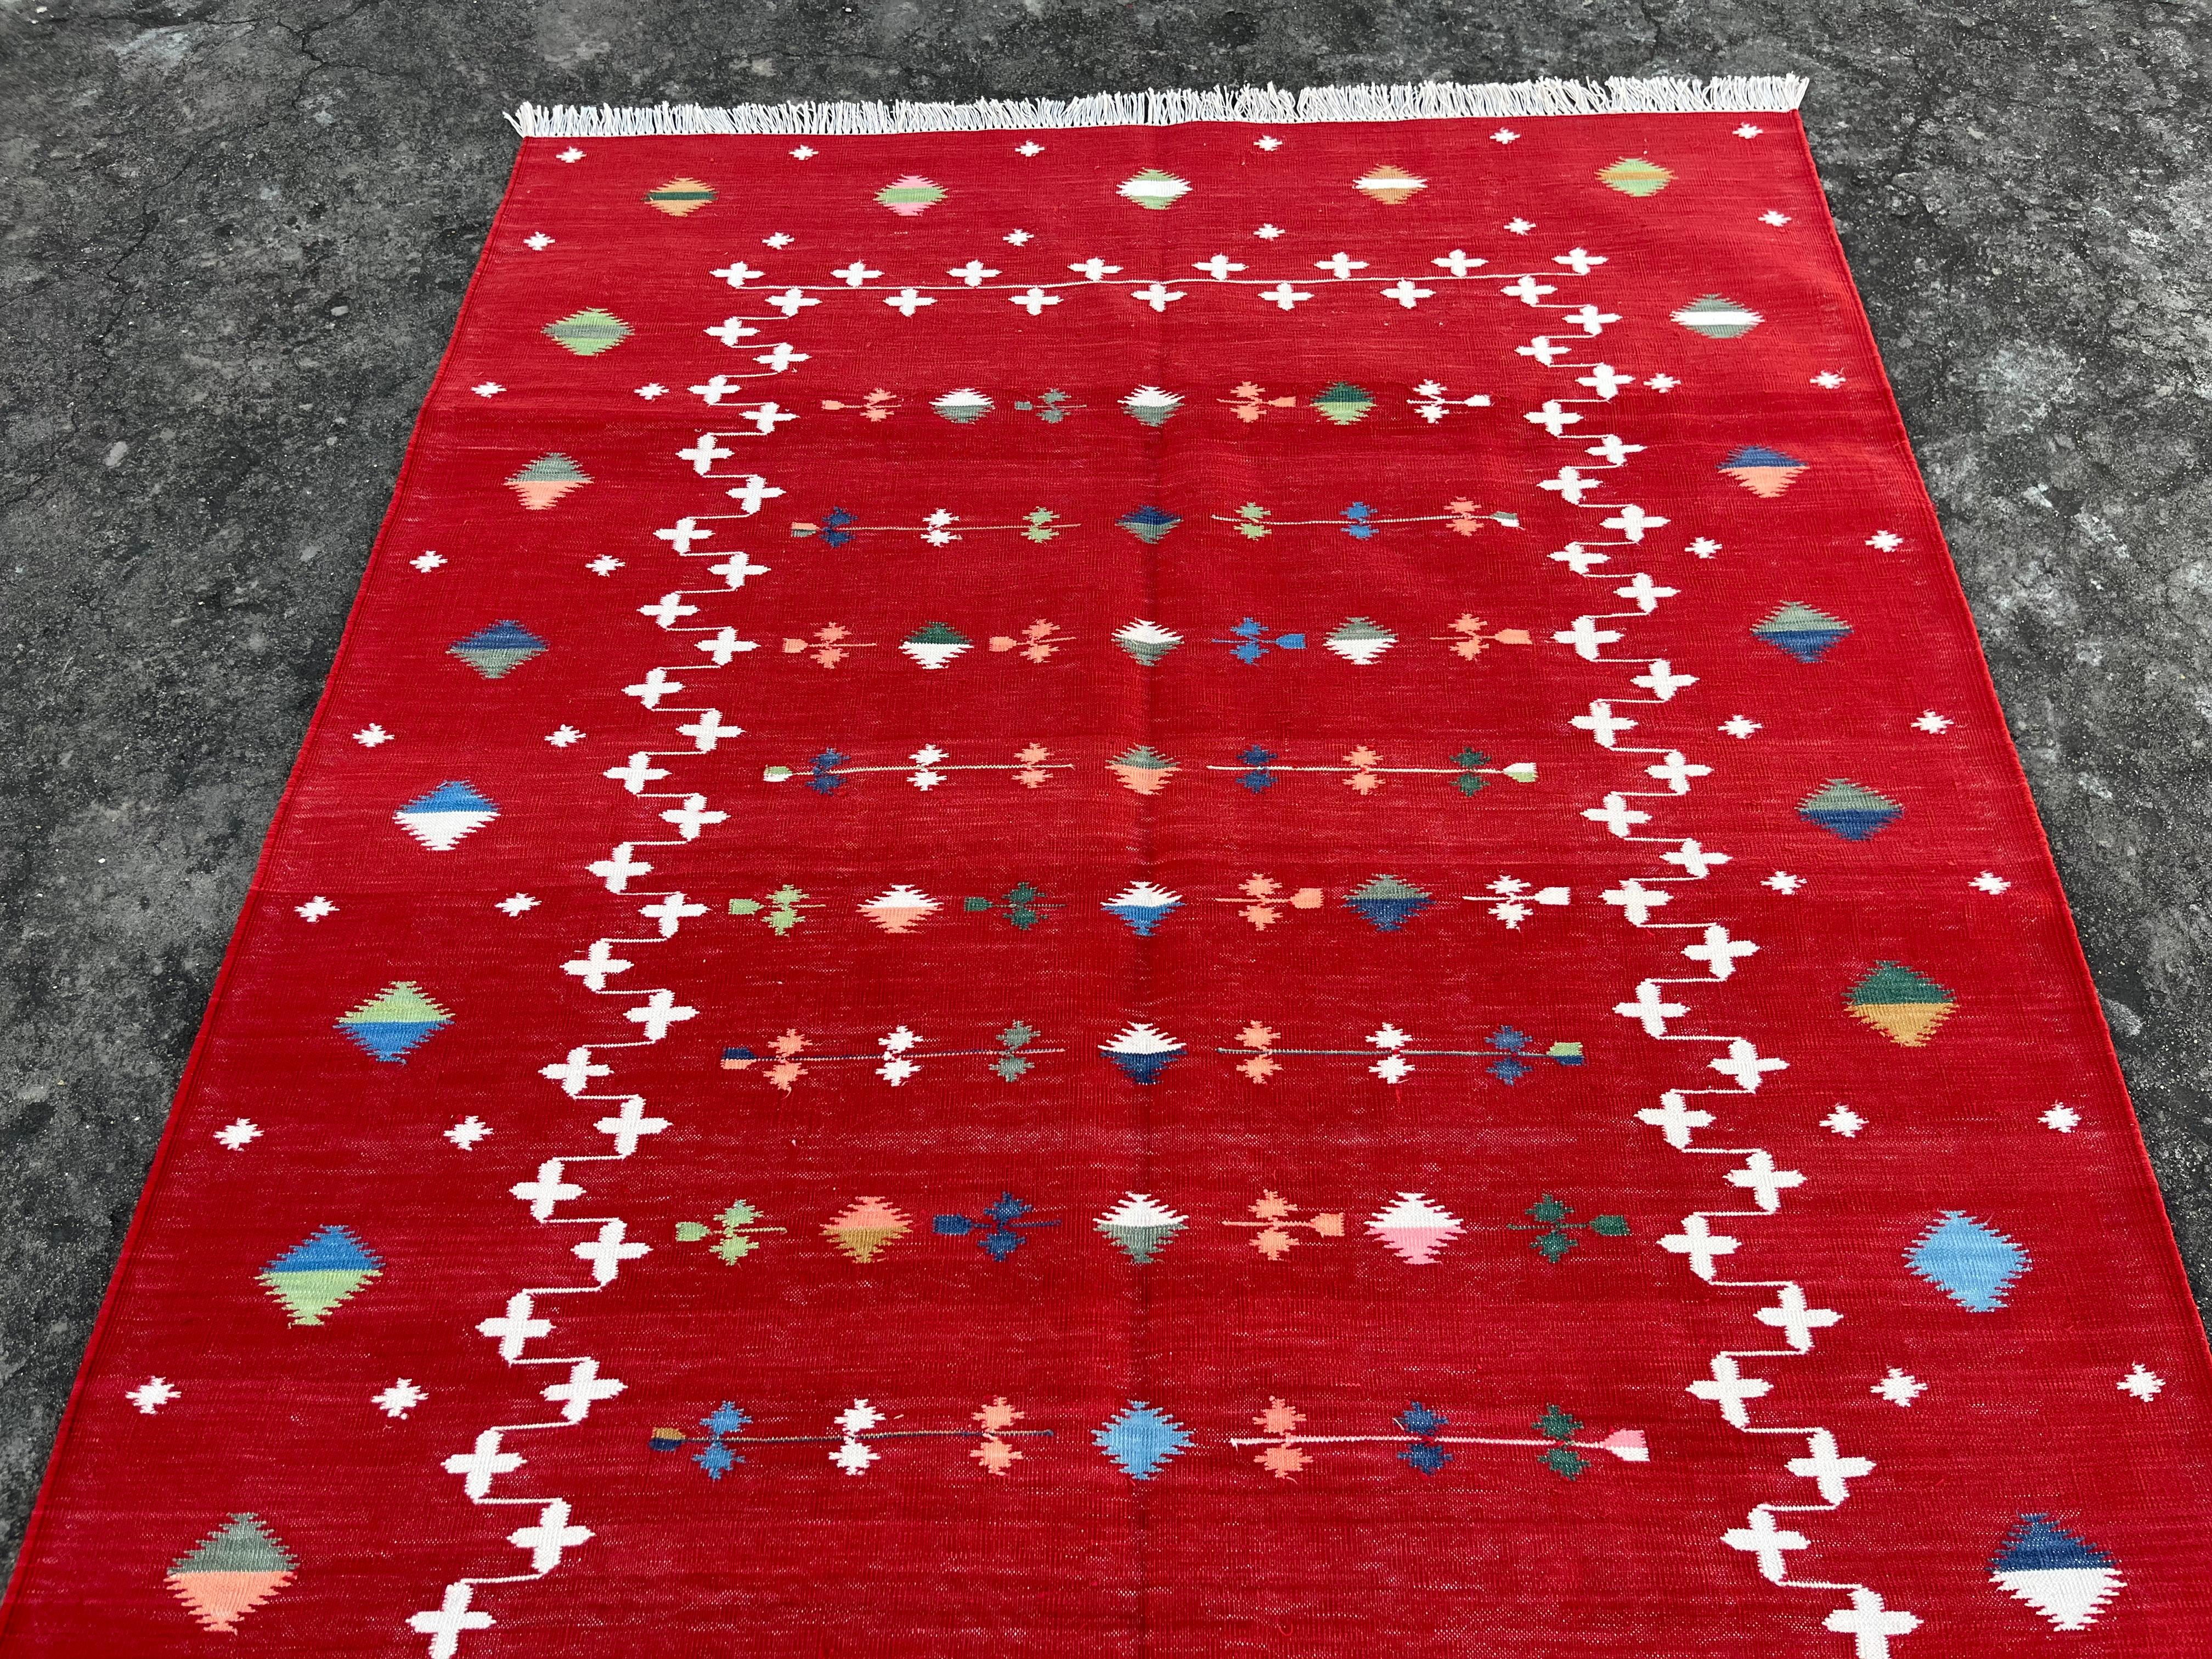 Contemporary Handmade Cotton Area Flat Weave Rug, 4x6 Red And White Shooting Star Dhurrie Rug For Sale